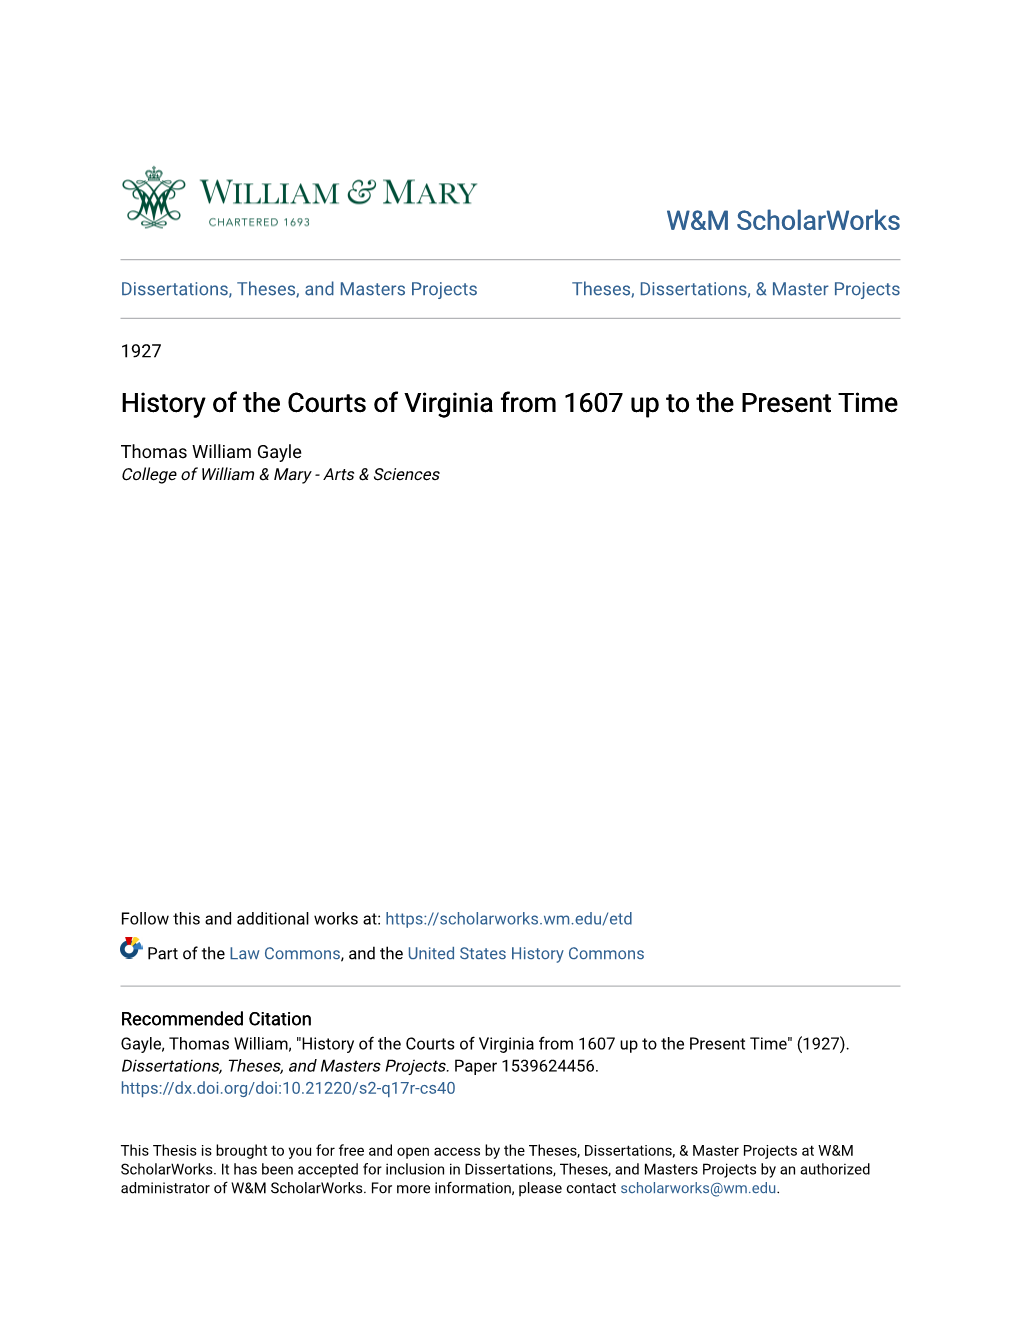 History of the Courts of Virginia from 1607 up to the Present Time